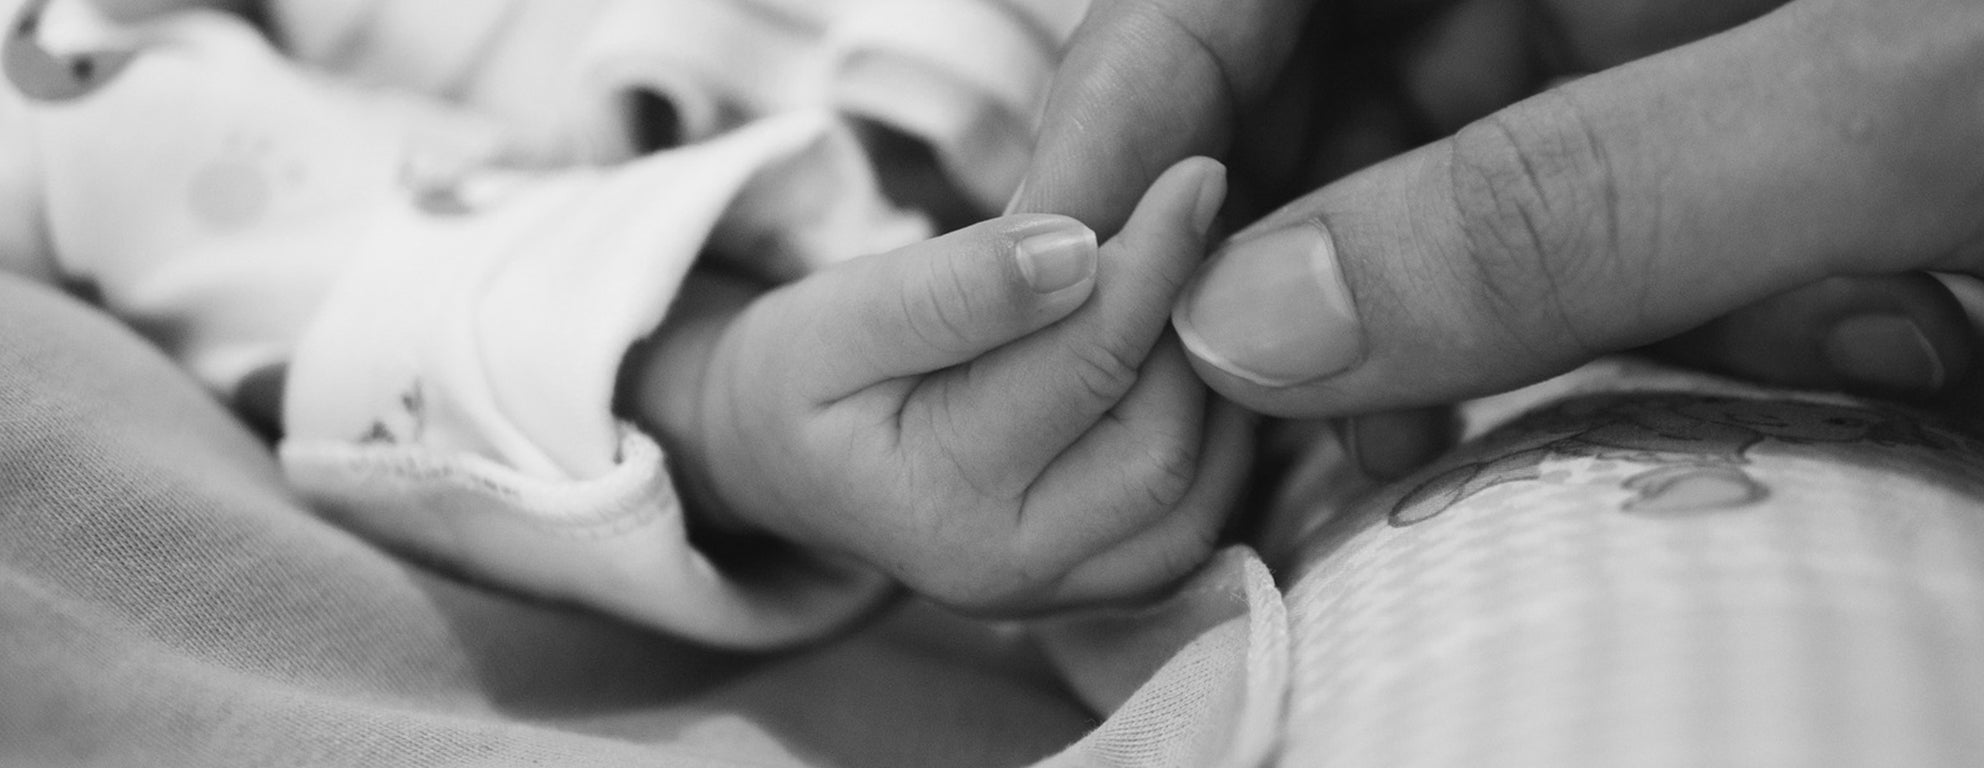 Black and white close up of an adult gently holding a baby's hand